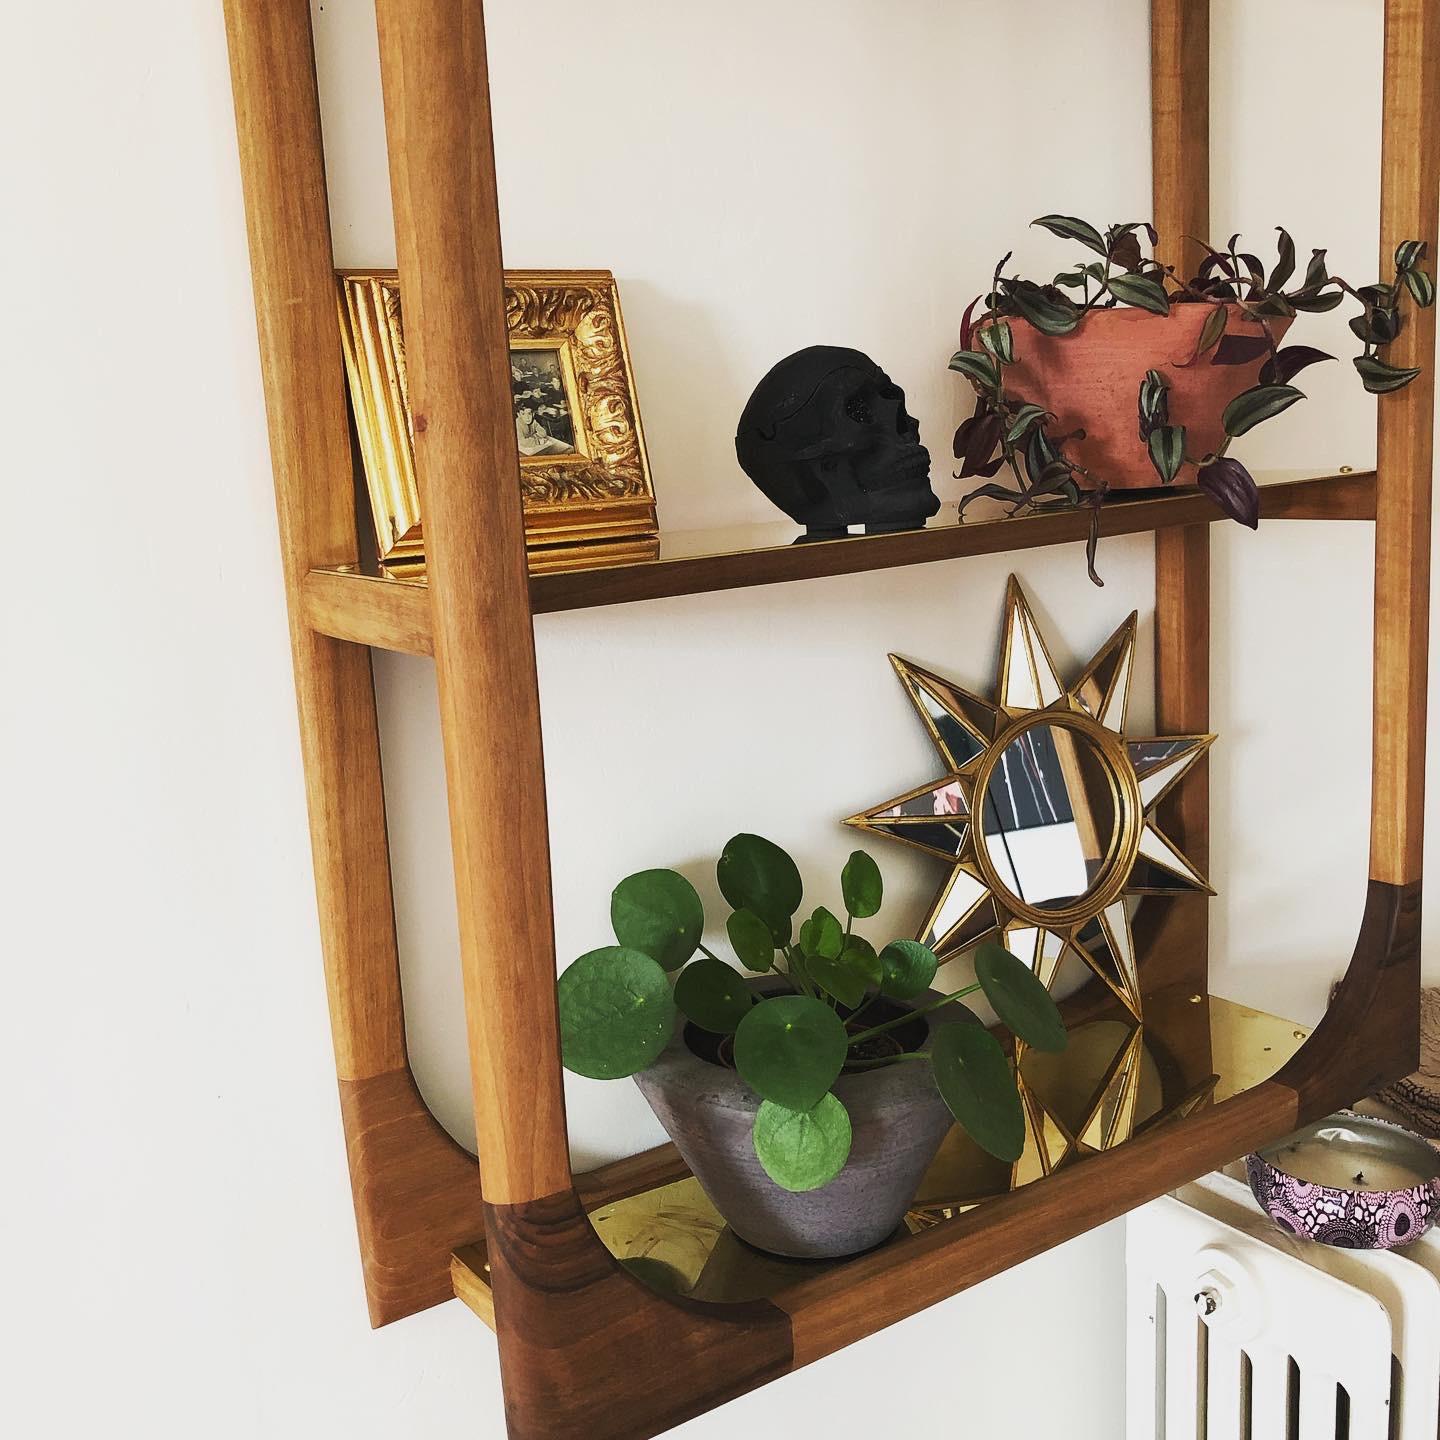 A handsome wall hung shelving unit hand made with the finest French walnut wood. The rectangular picture frame façade makes this item uniquely stand out in a room and the polished brass shelves add a touch of class. The wood is treated with a